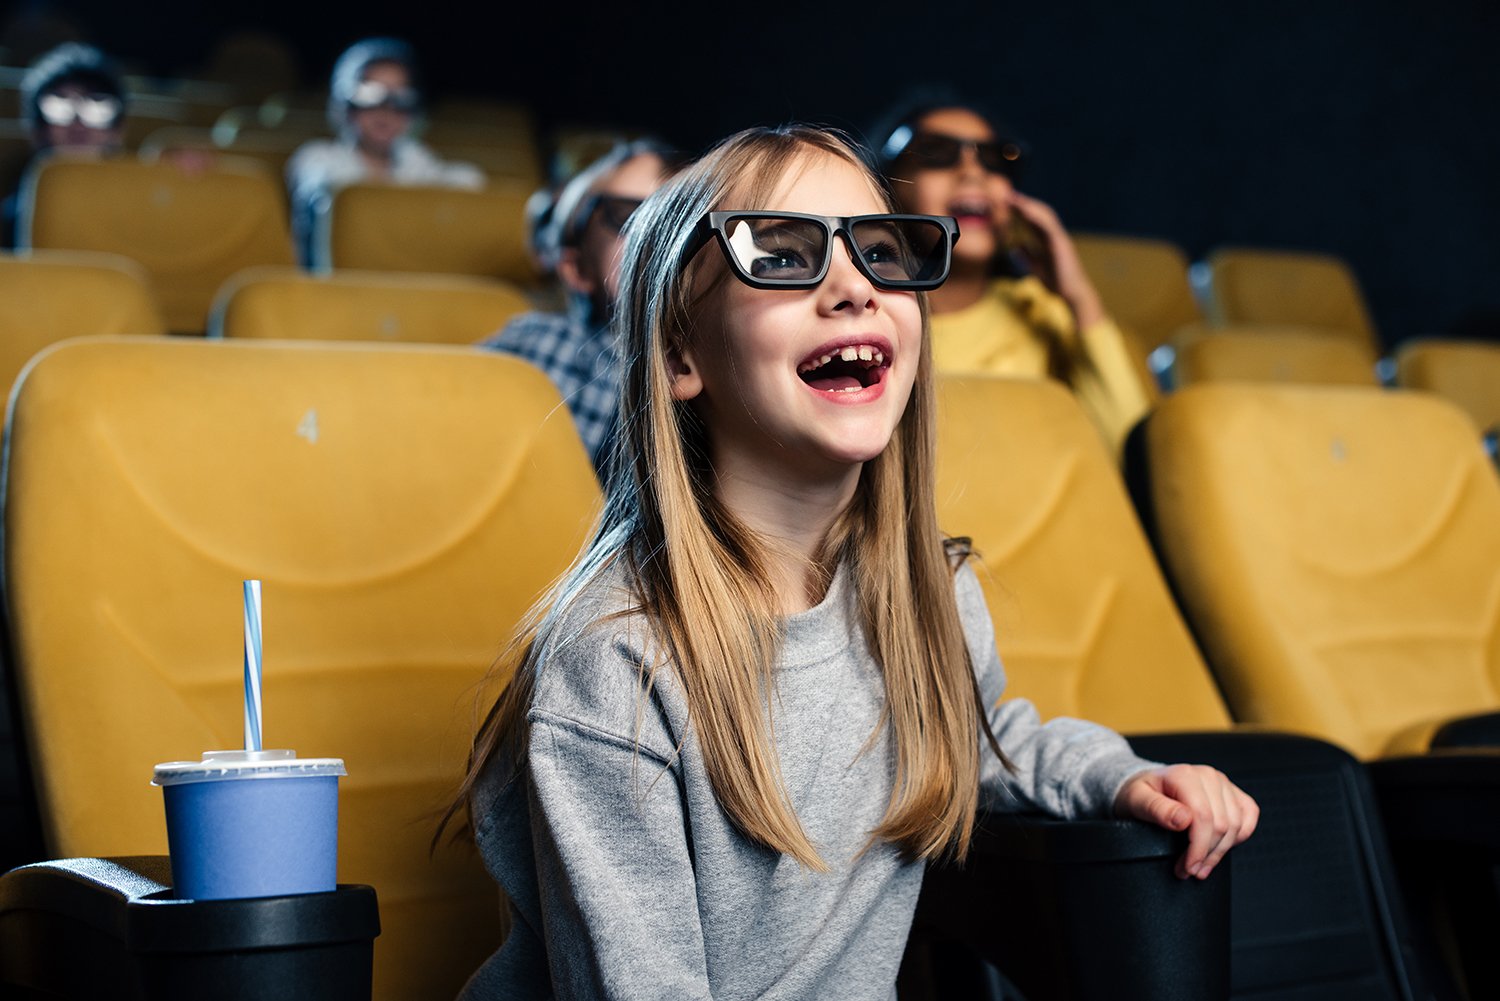 The picture shows a girl watching a movie at the cinema. Photo Pexels